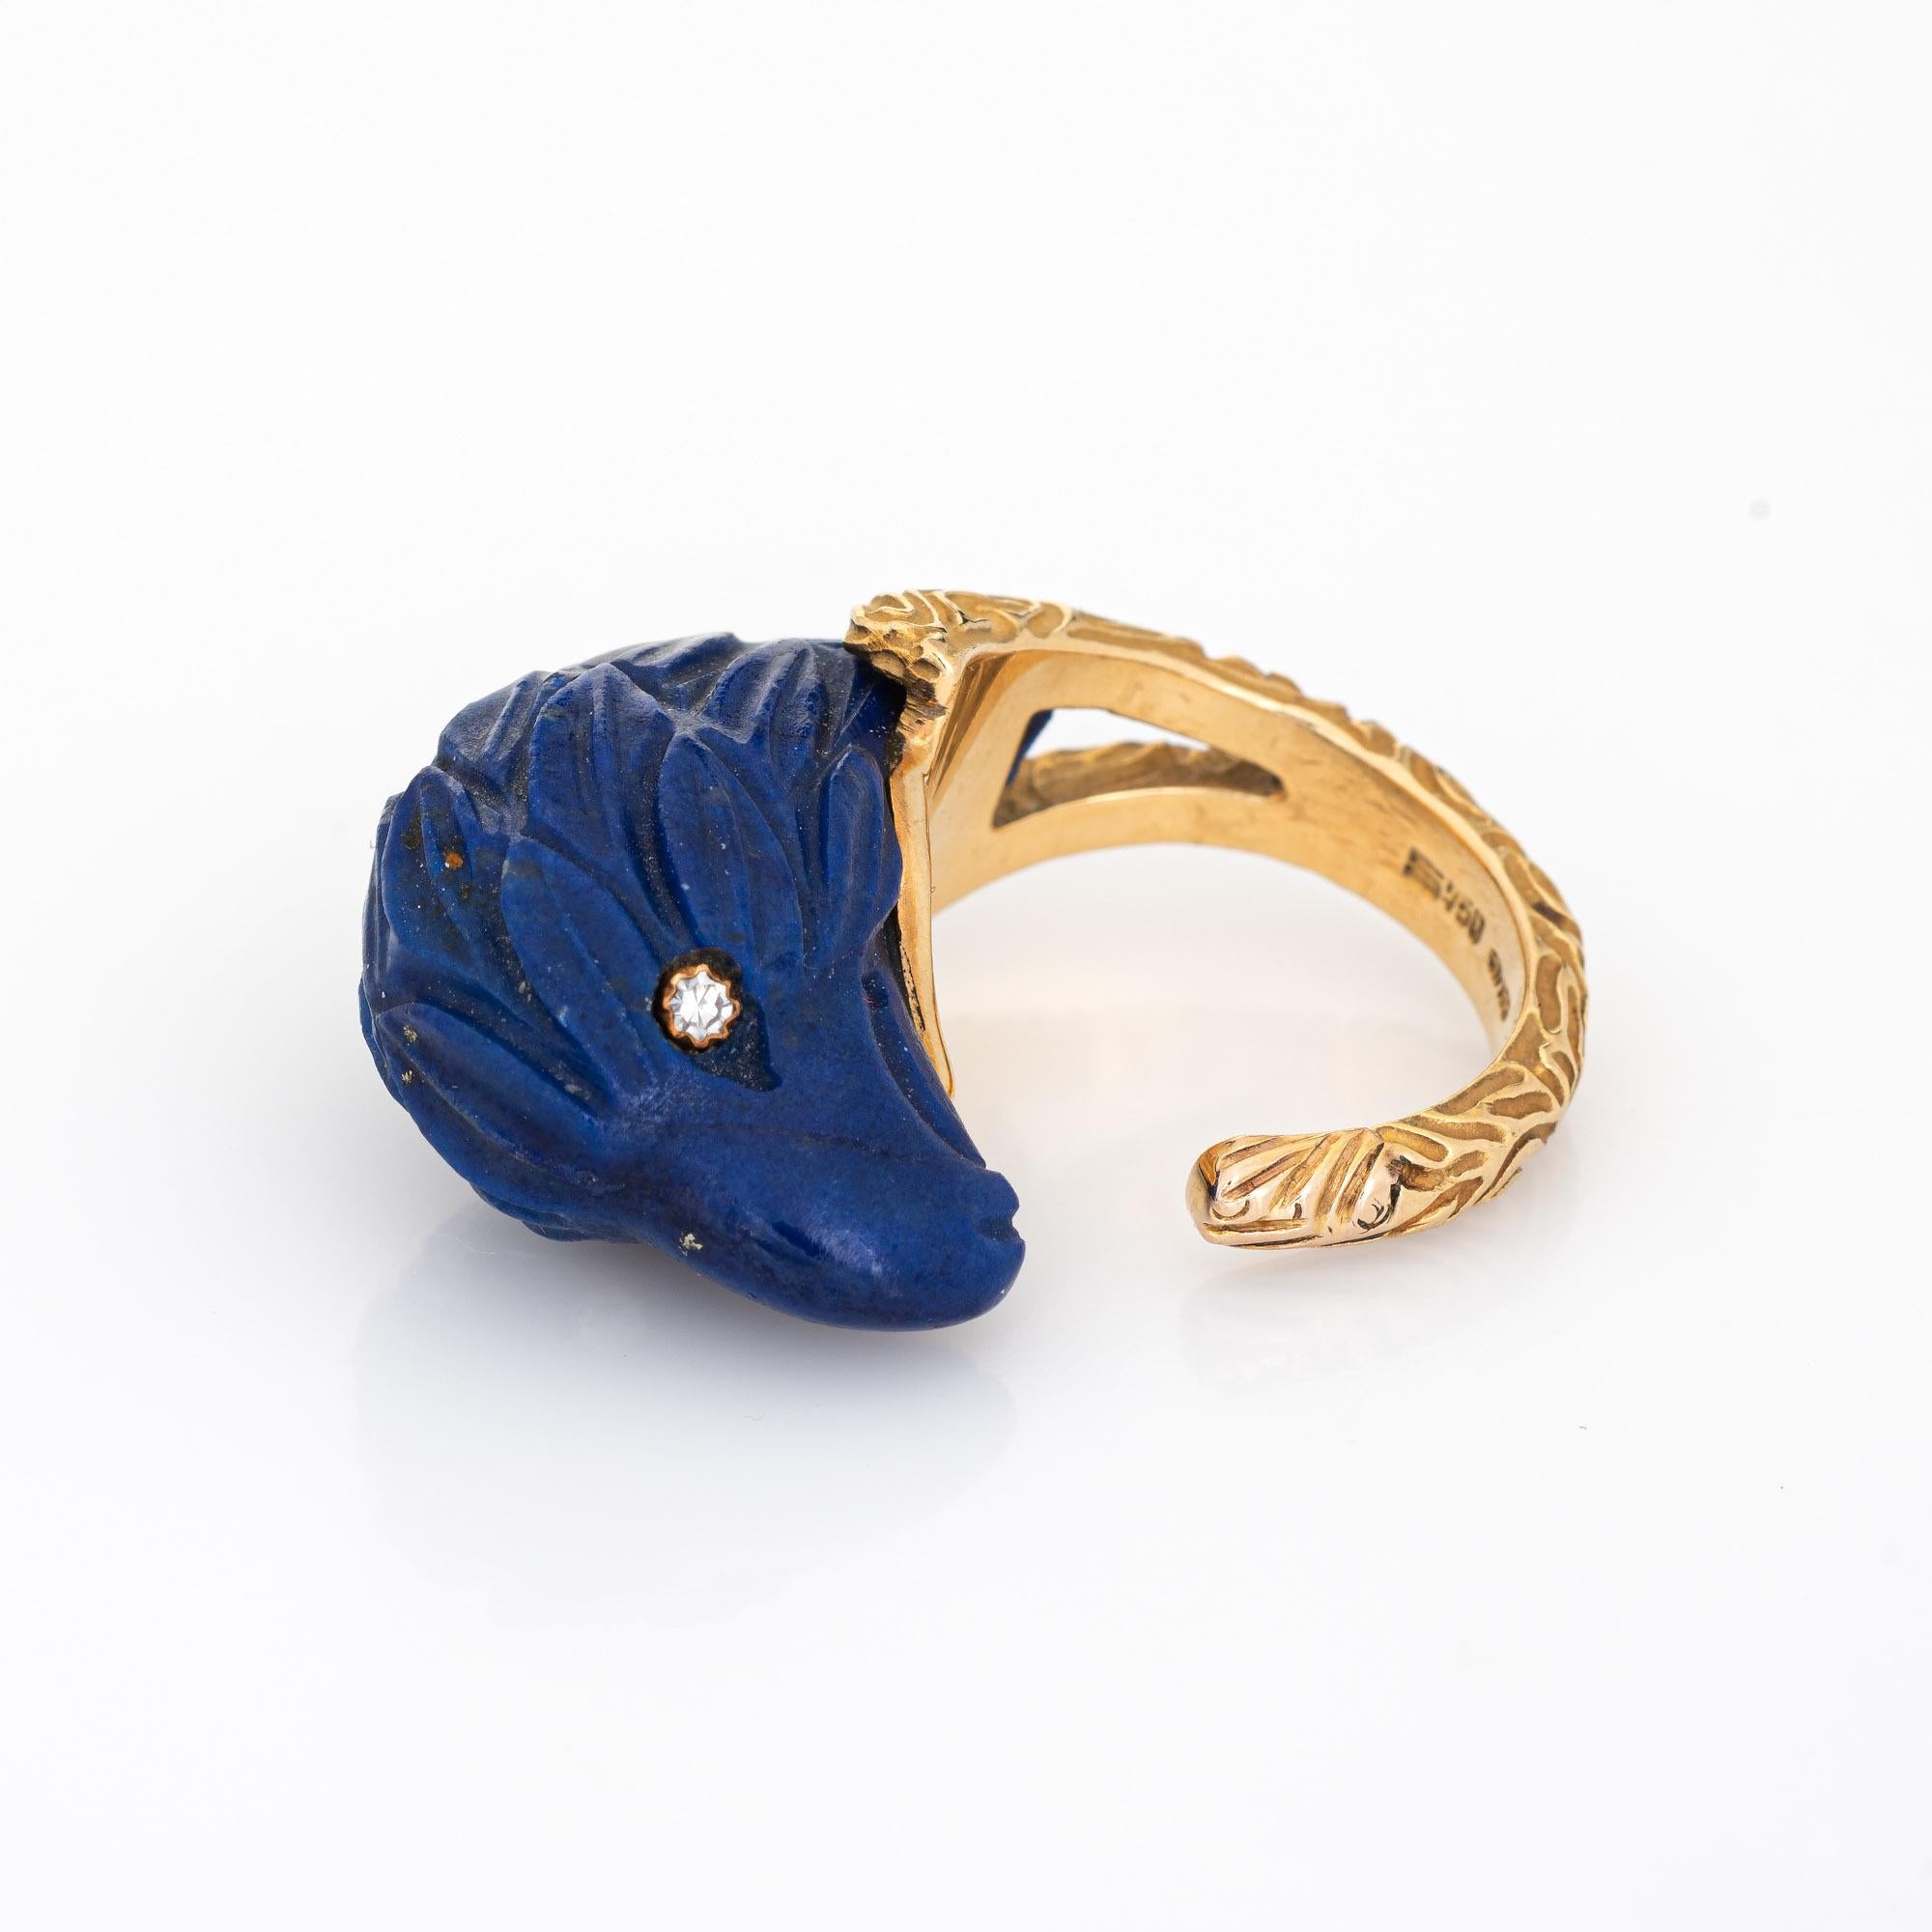 Stylish vintage American bald eagle ring (circa 1960s to 1970s) crafted in 18 karat yellow gold. 

Lapis lazuli measures 24mm x 12mm (in very good condition and free of cracks or chips). Two diamonds total an estimated 0.02 carats (estimated at G-H